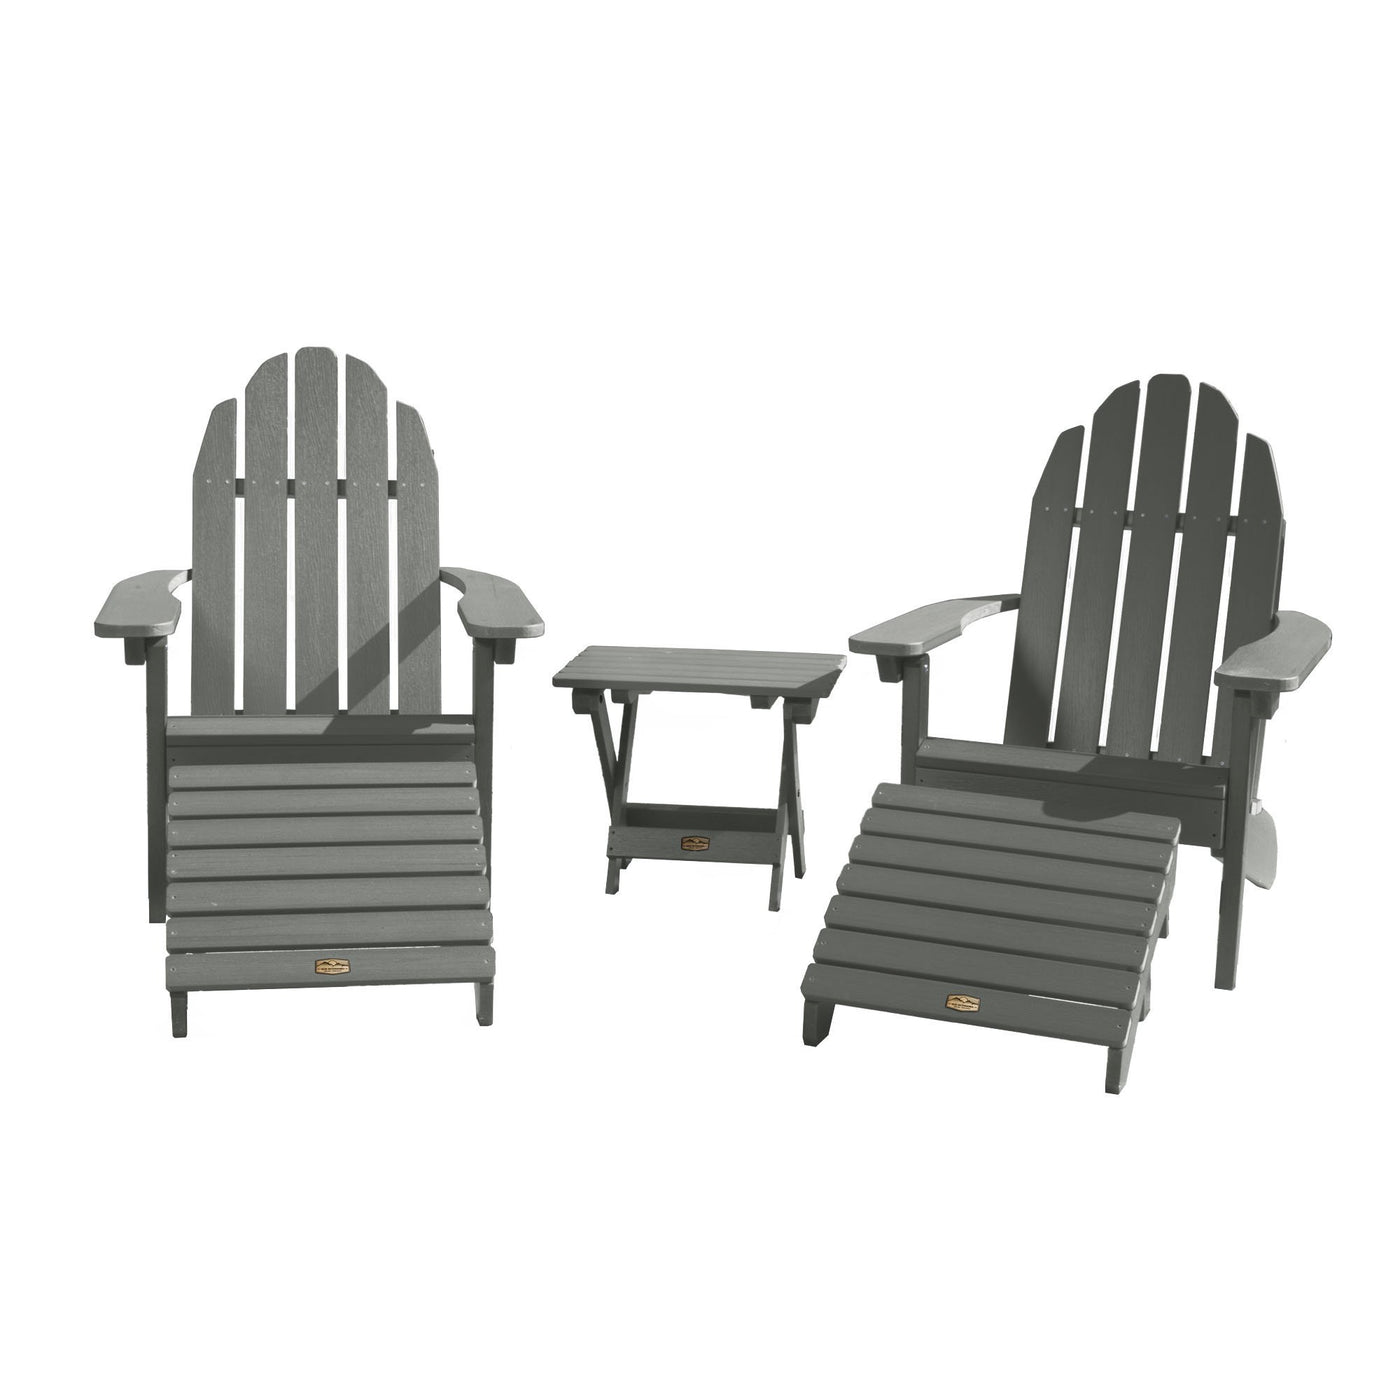 2 Essential Adirondack Chairs with Folding Side Table & 2 Folding Ottomans ELK OUTDOORS® Gray 